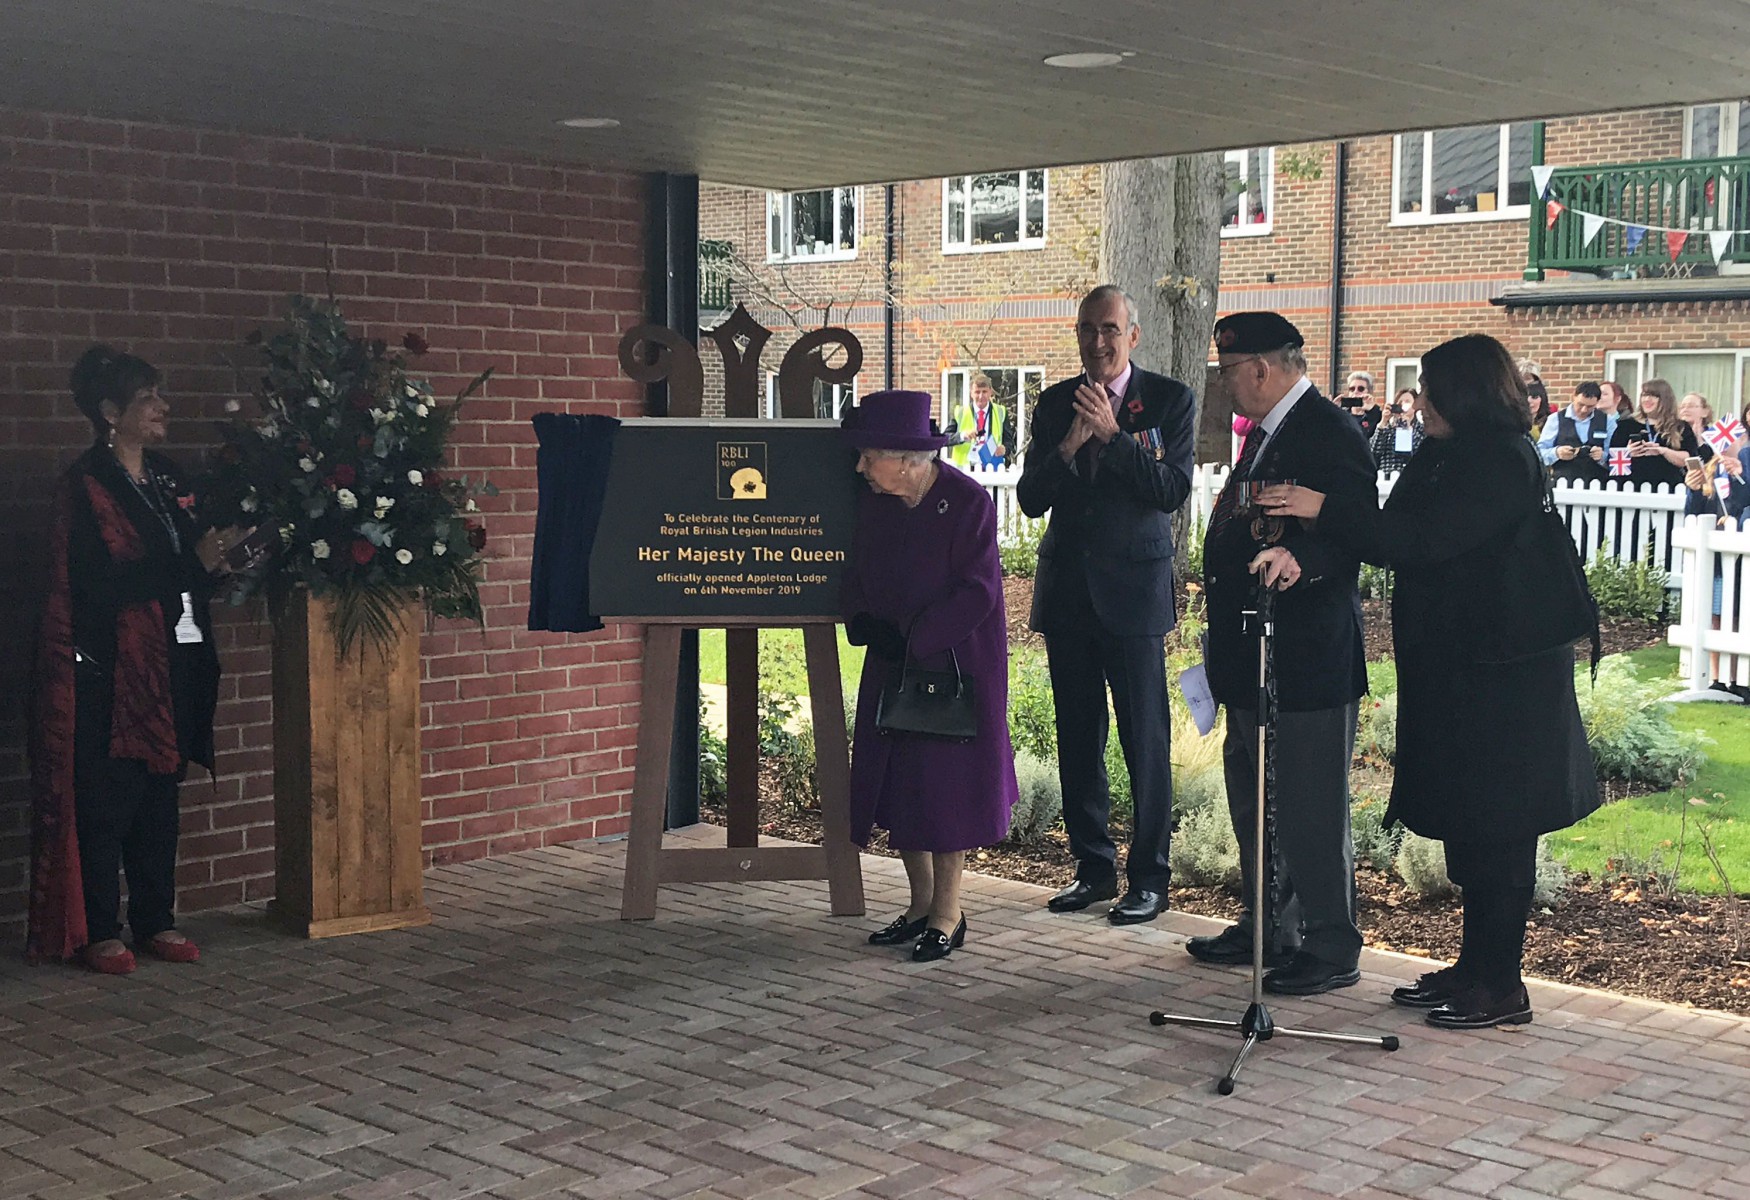 The Queen unveiled a plaque to officially open the new Appleton Lodge care facility